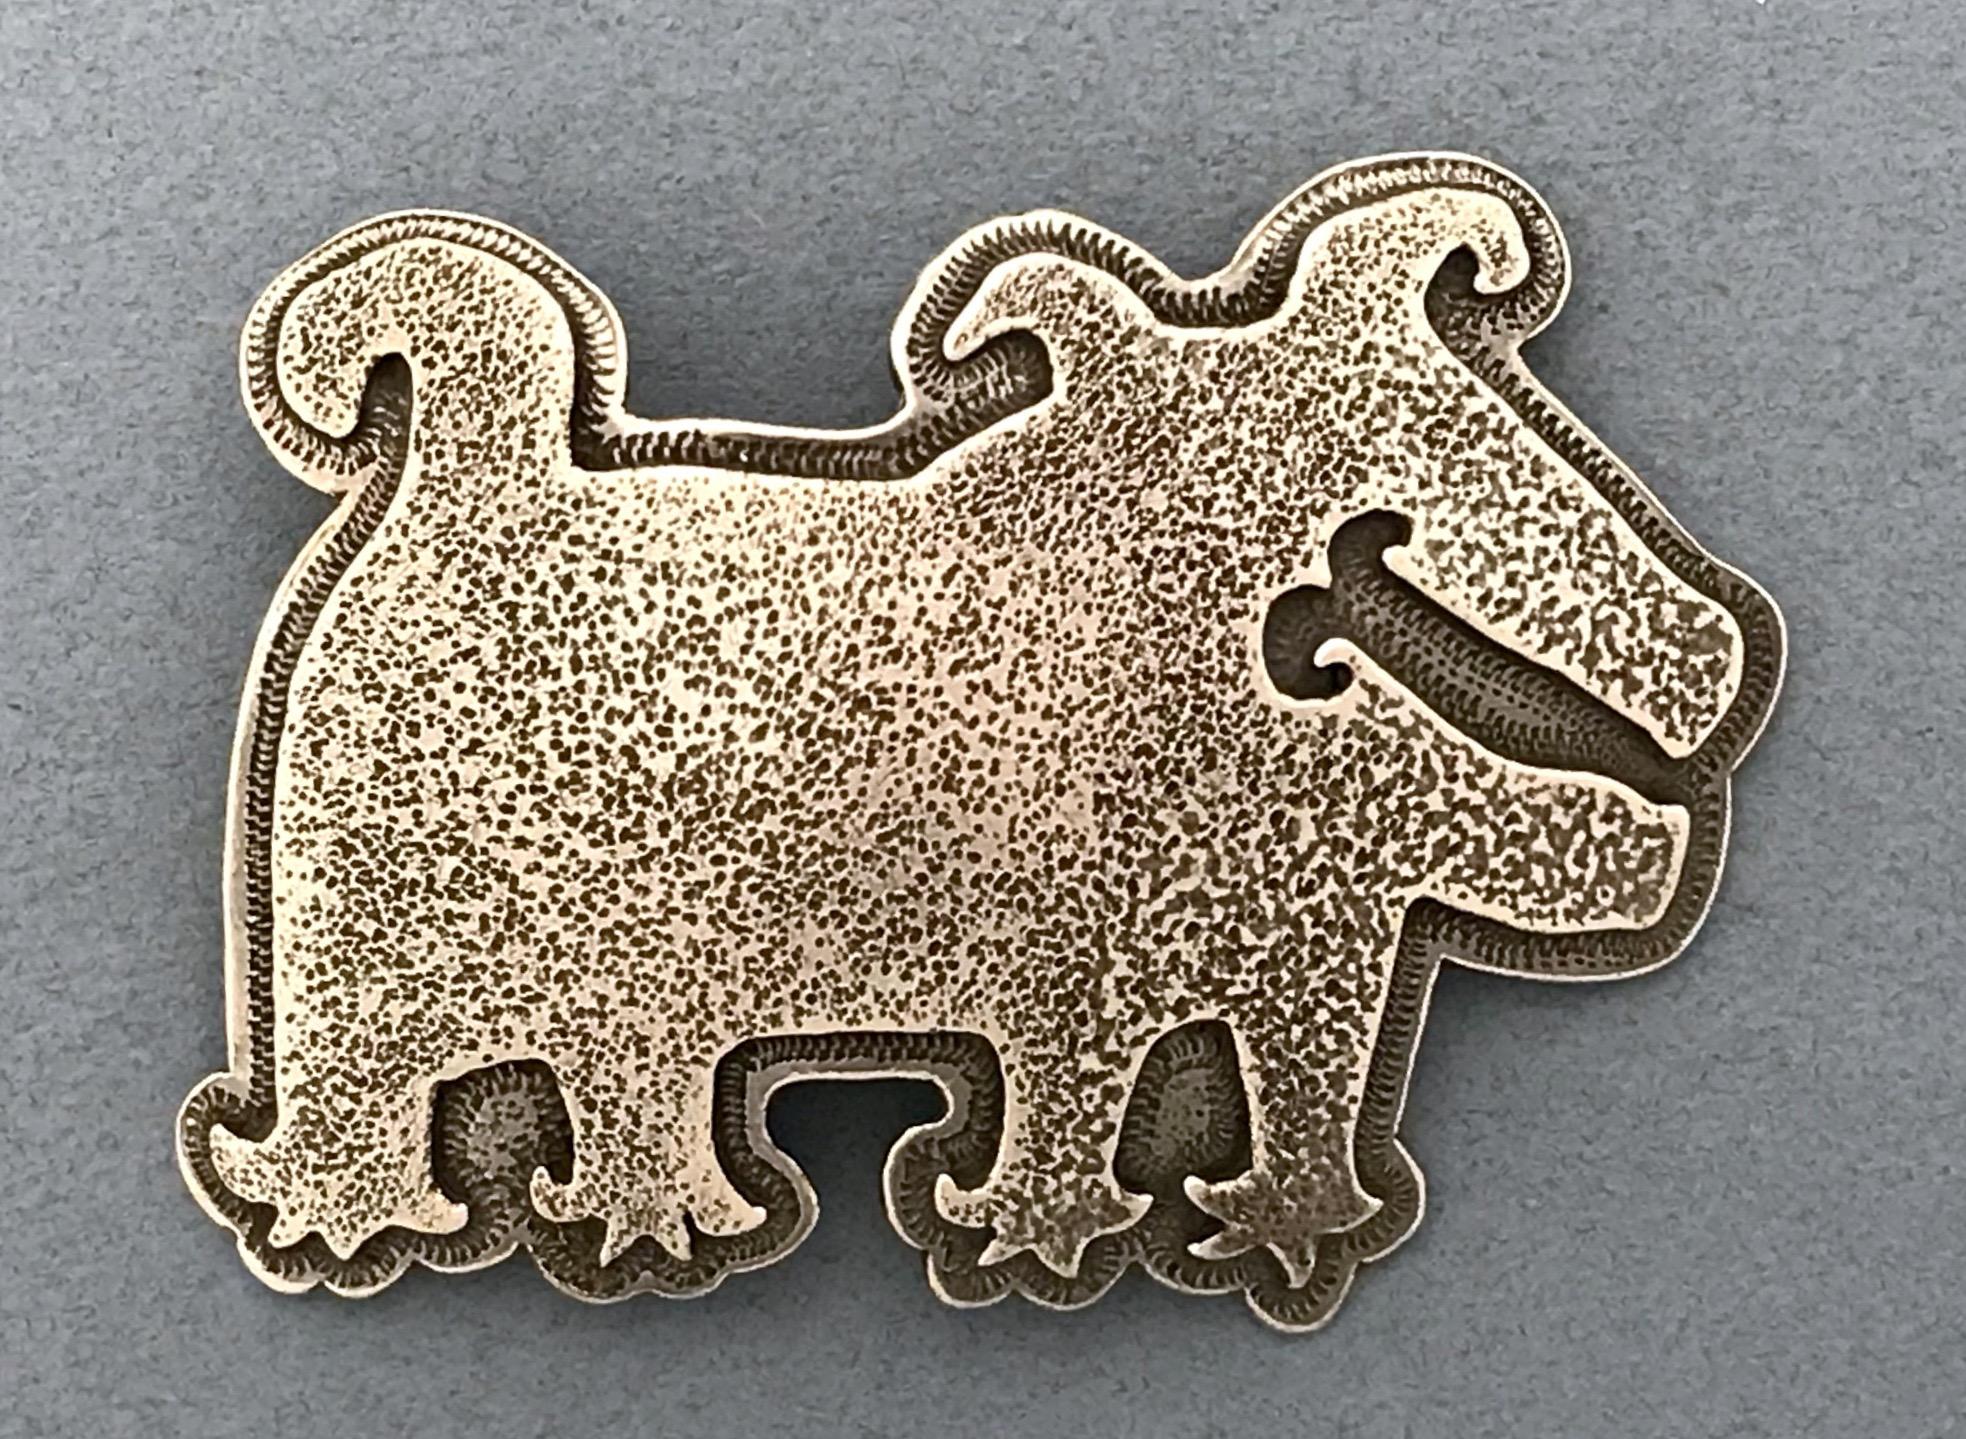 Dog with Funky Feet, sterling silver pin pendant Melanie Yazzie Navajo Native American new

Melanie A. Yazzie (Navajo-Diné) is a highly regarded multimedia artist known for her printmaking, paintings, sculpture, and jewelry designs.

She has